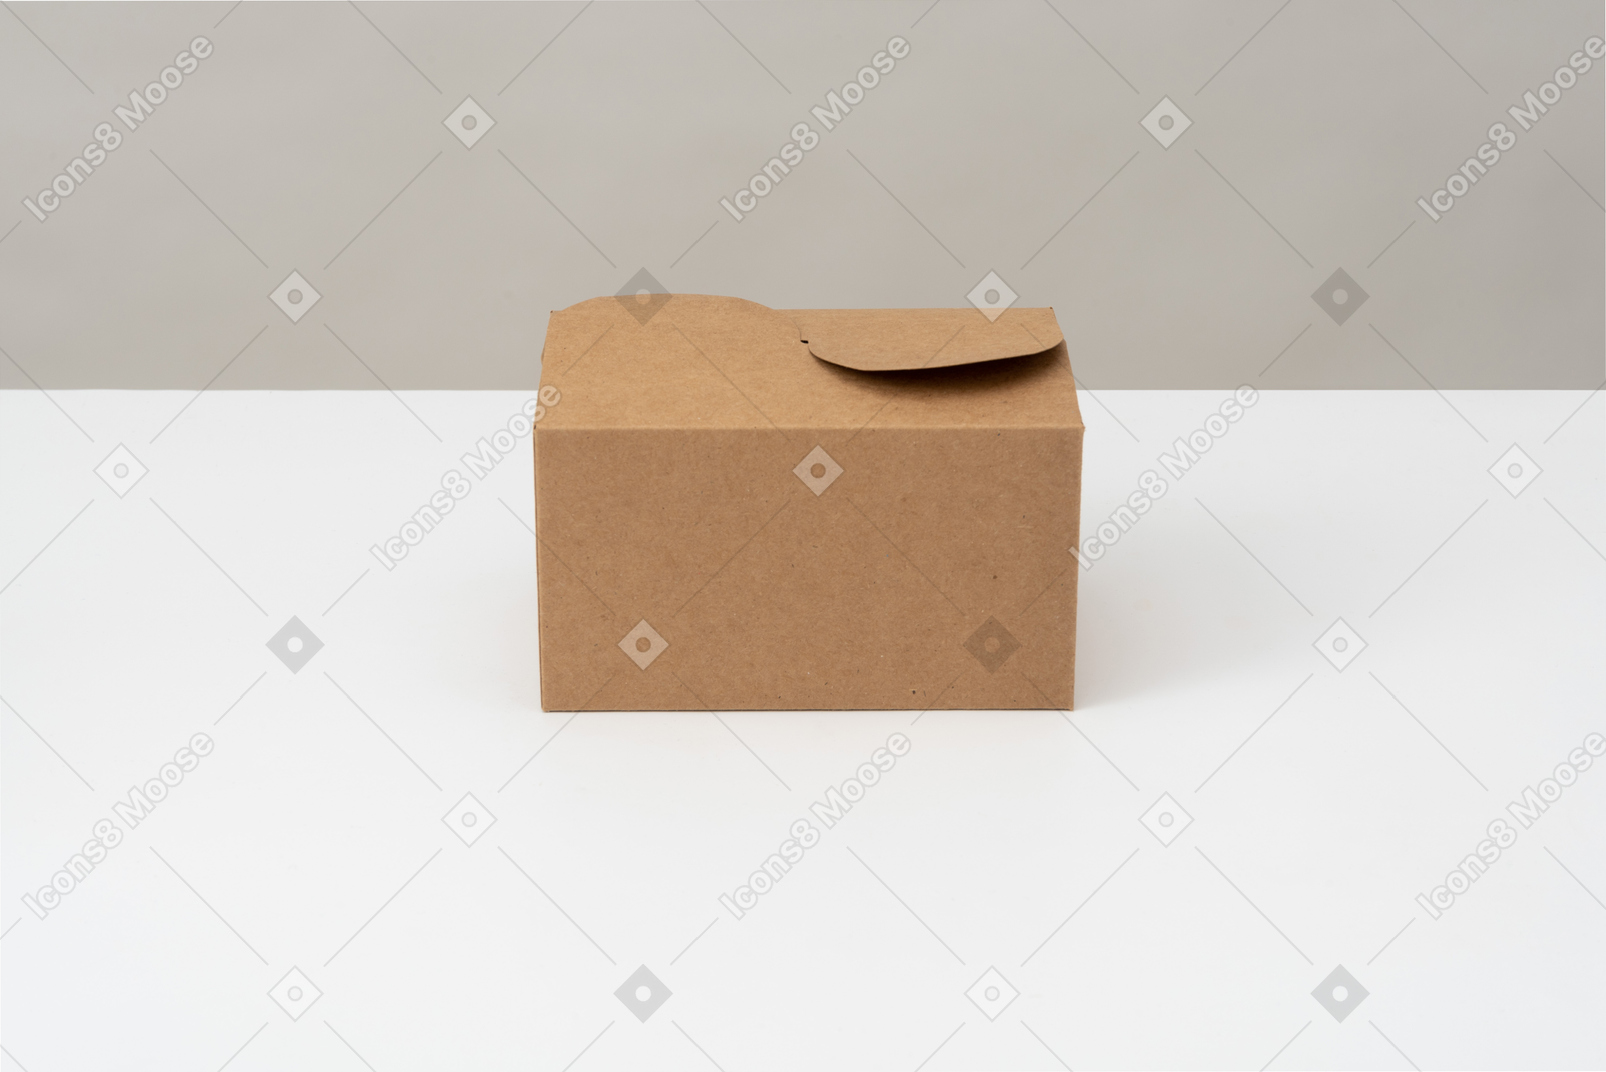 Promotional brown paper box